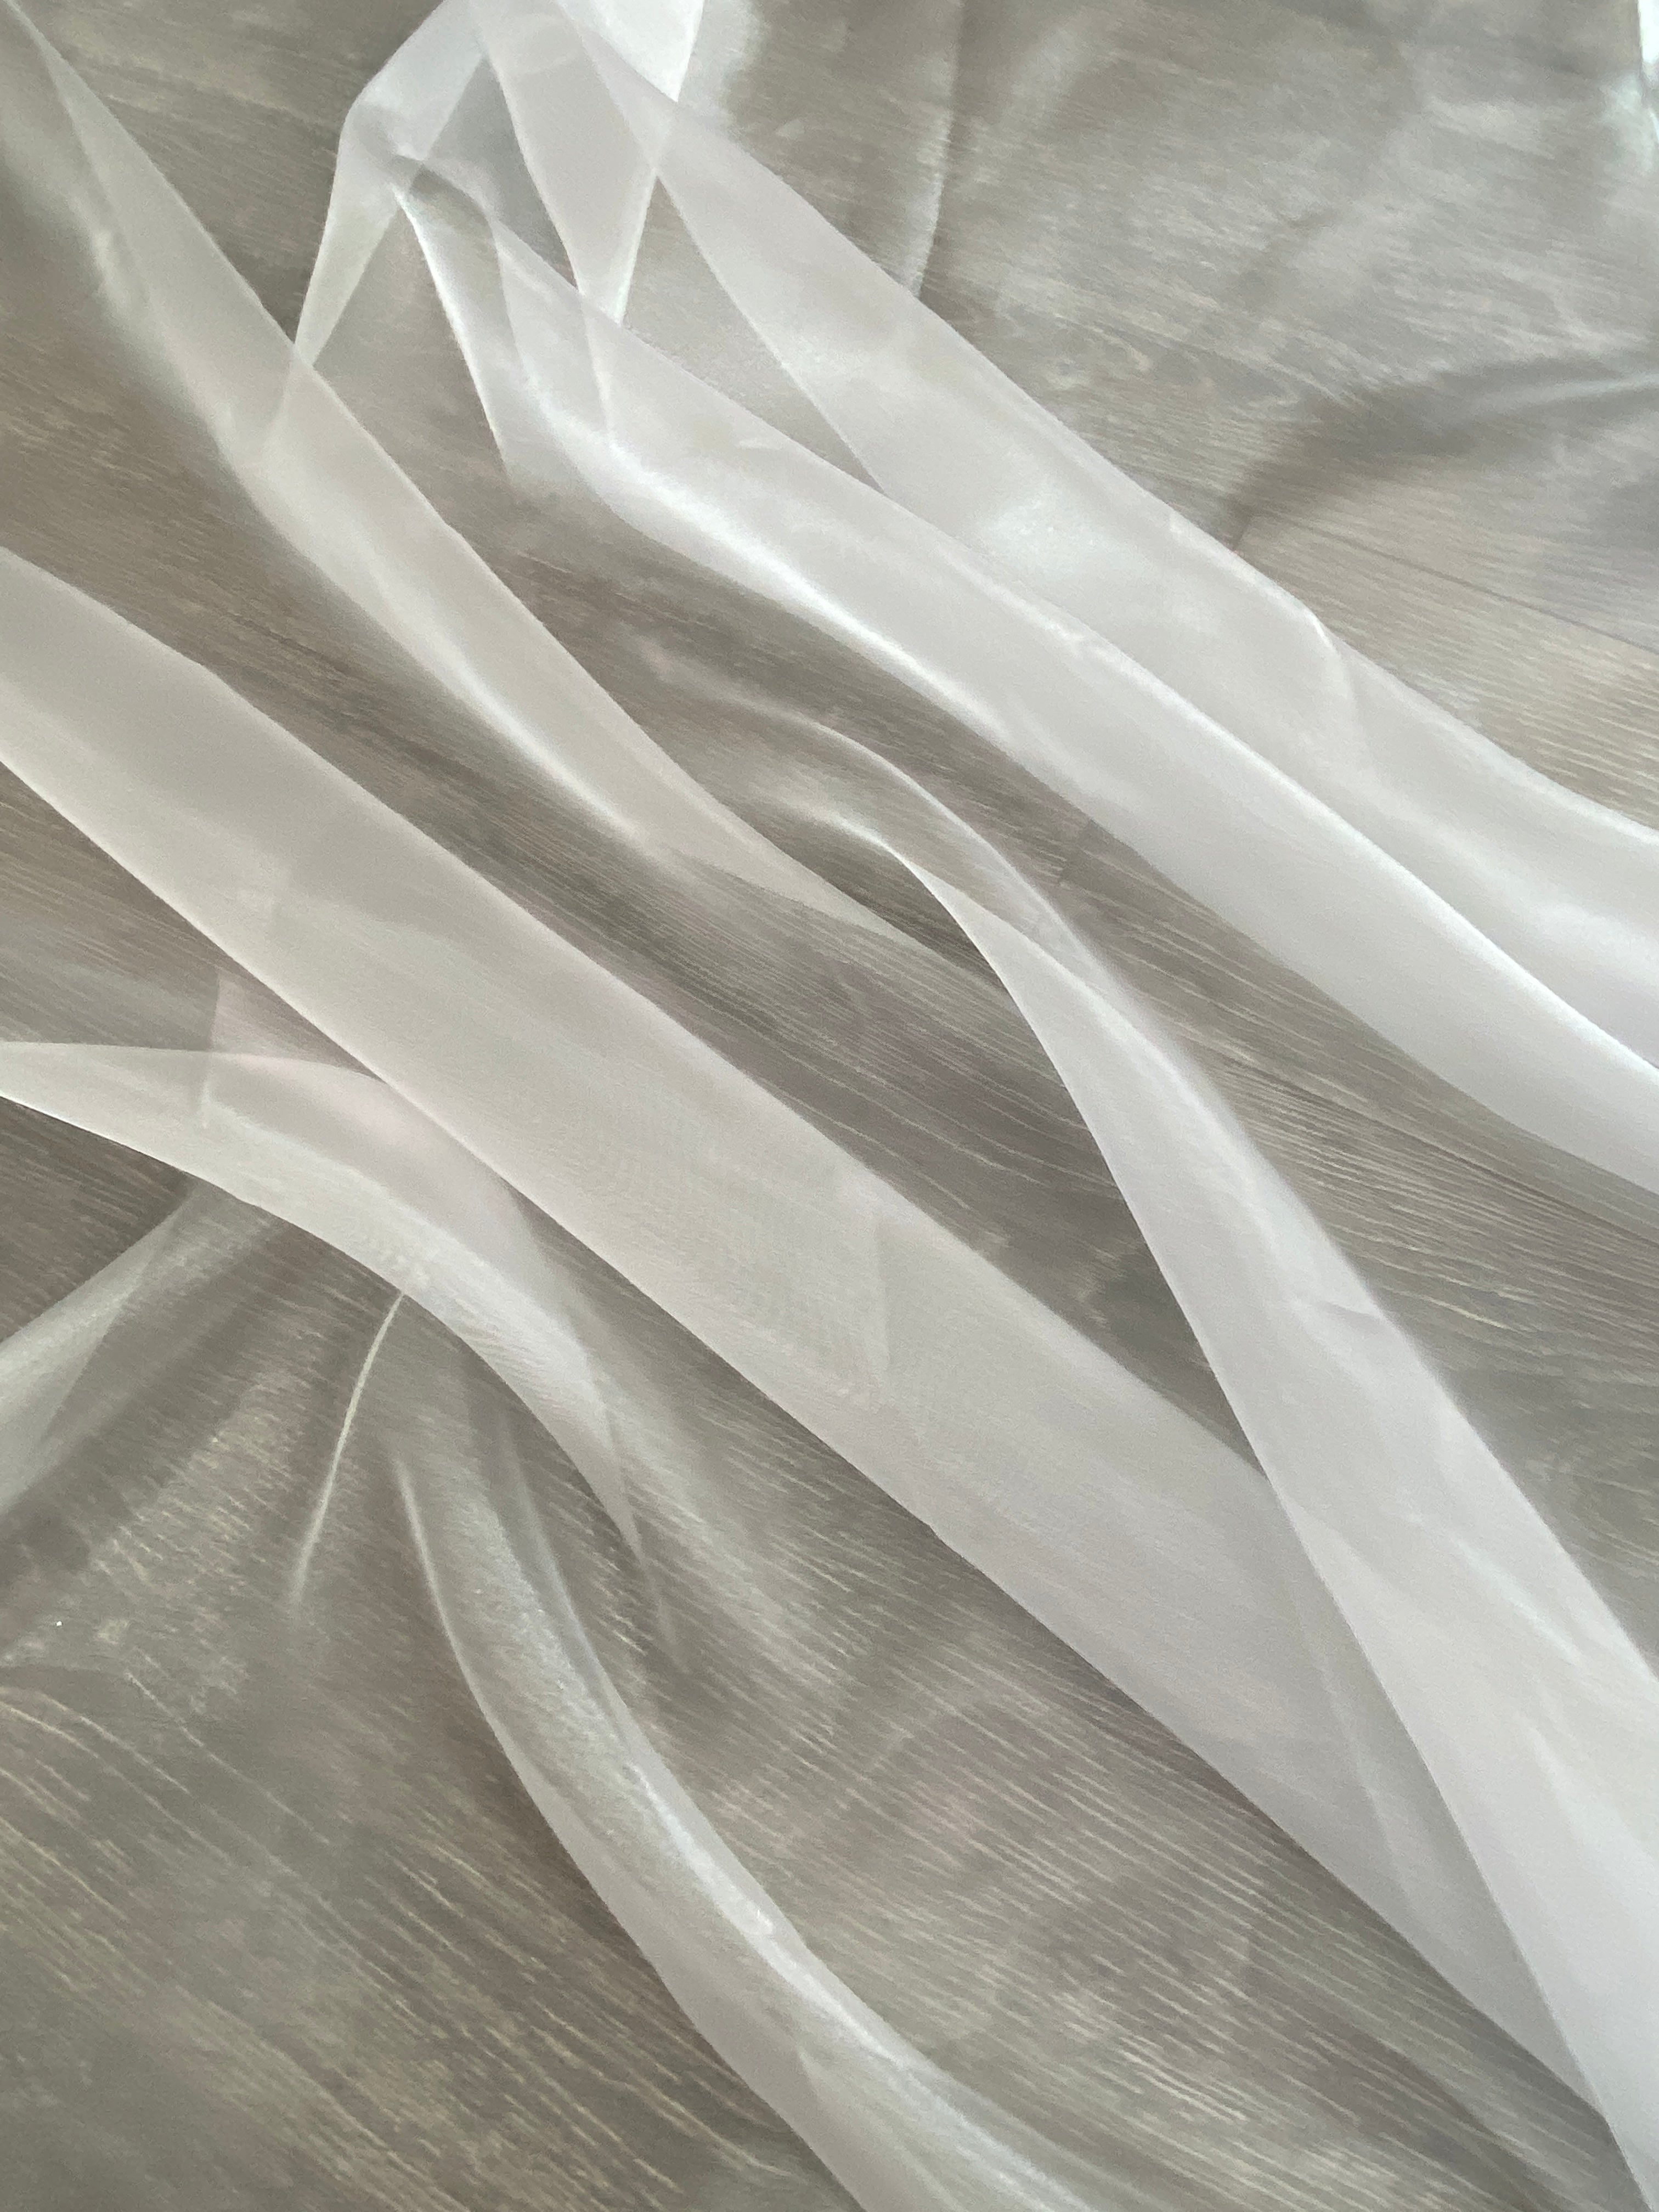  White Crystal Organza, White Crystal Organza for woman, off White Crystal Organza, milky White Crystal Organza, bright White Crystal Organza, White Crystal Organza for bride, Crystal Organza for party wear, premium Crystal Organza, Crystal Organza in low price